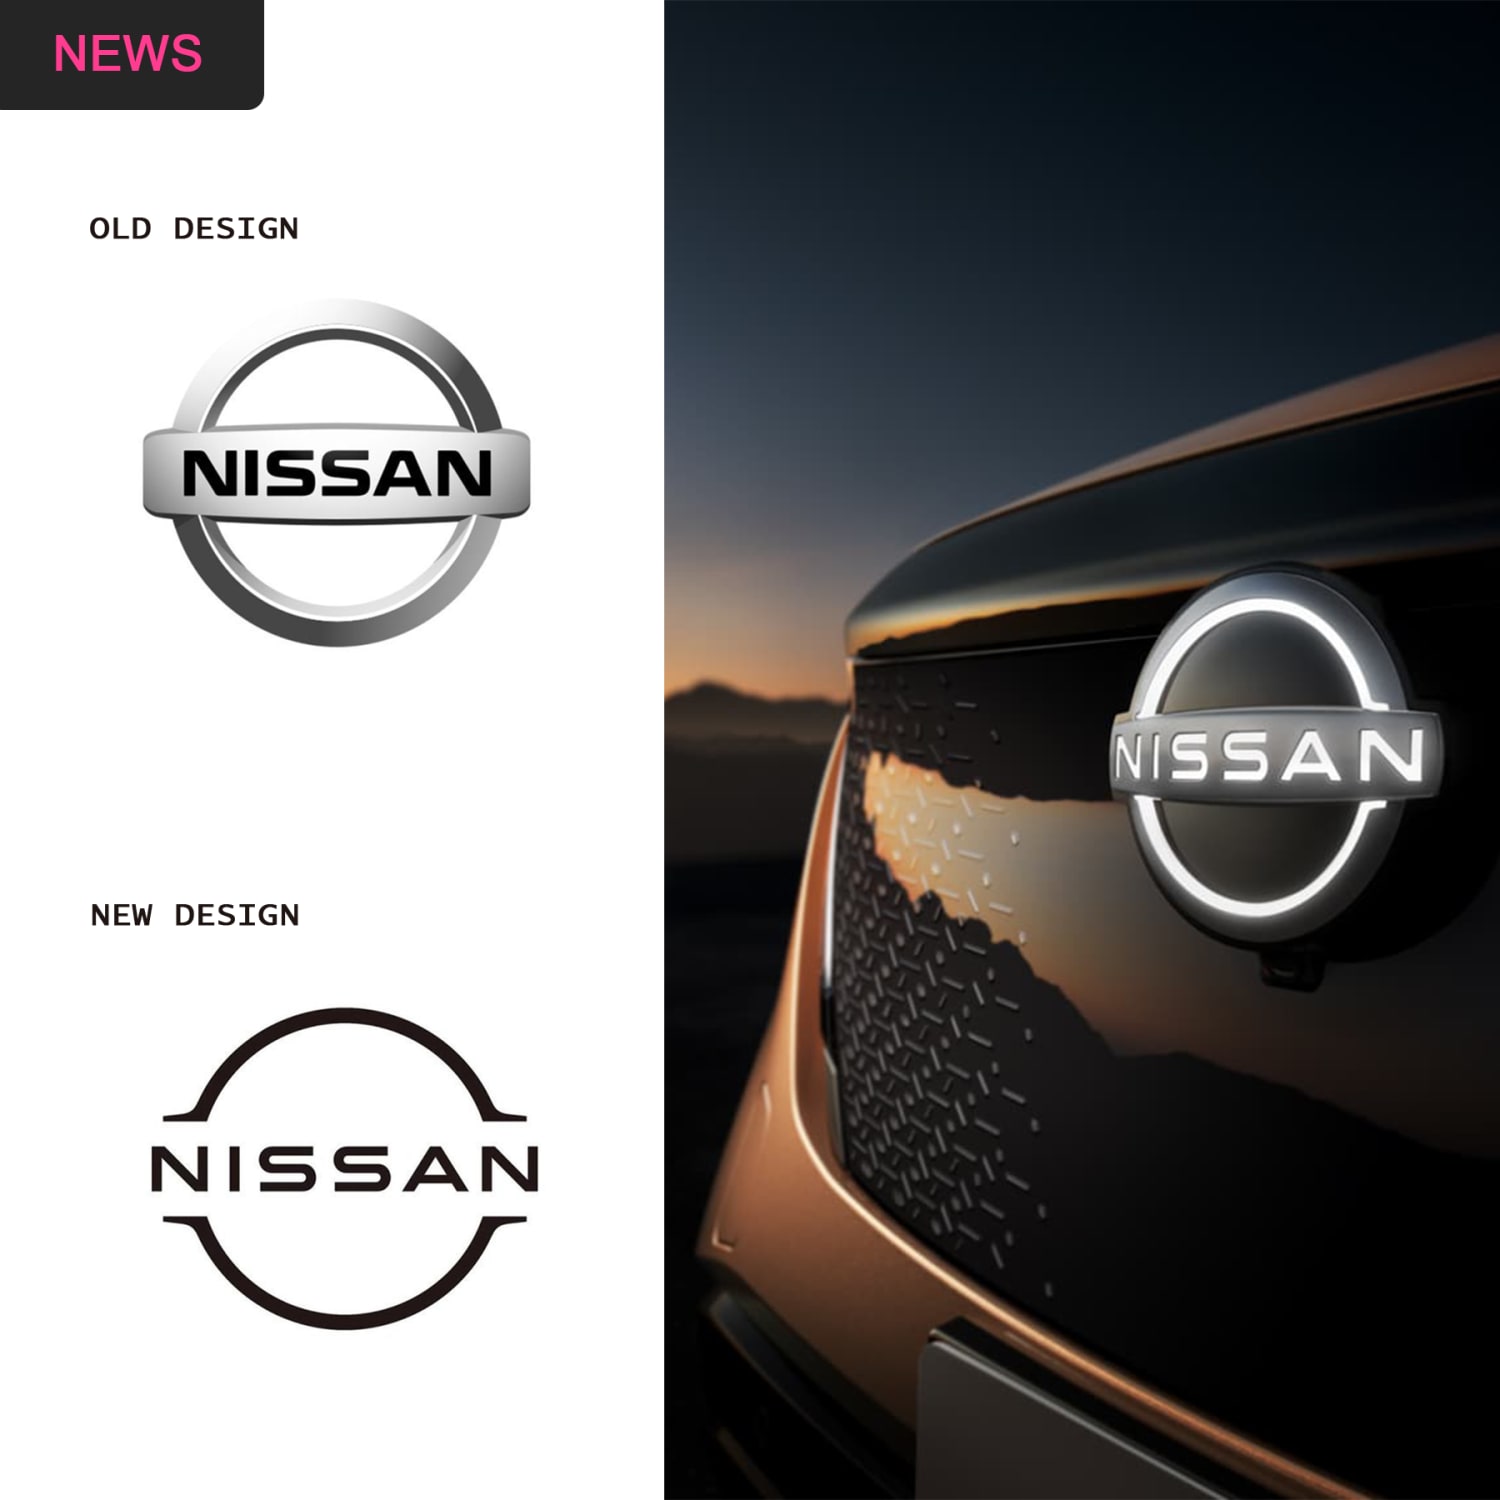 Japanese car brand Nissan has joined BMW, MINI and Volkswagen in officially replacing its three-dimensional emblem with a flat, two-dimensional logo. Nissan's debuted its new logo on the electric Ariya SUV and all of the brand's future fully-electric vehicles will feature an illuminated logo version